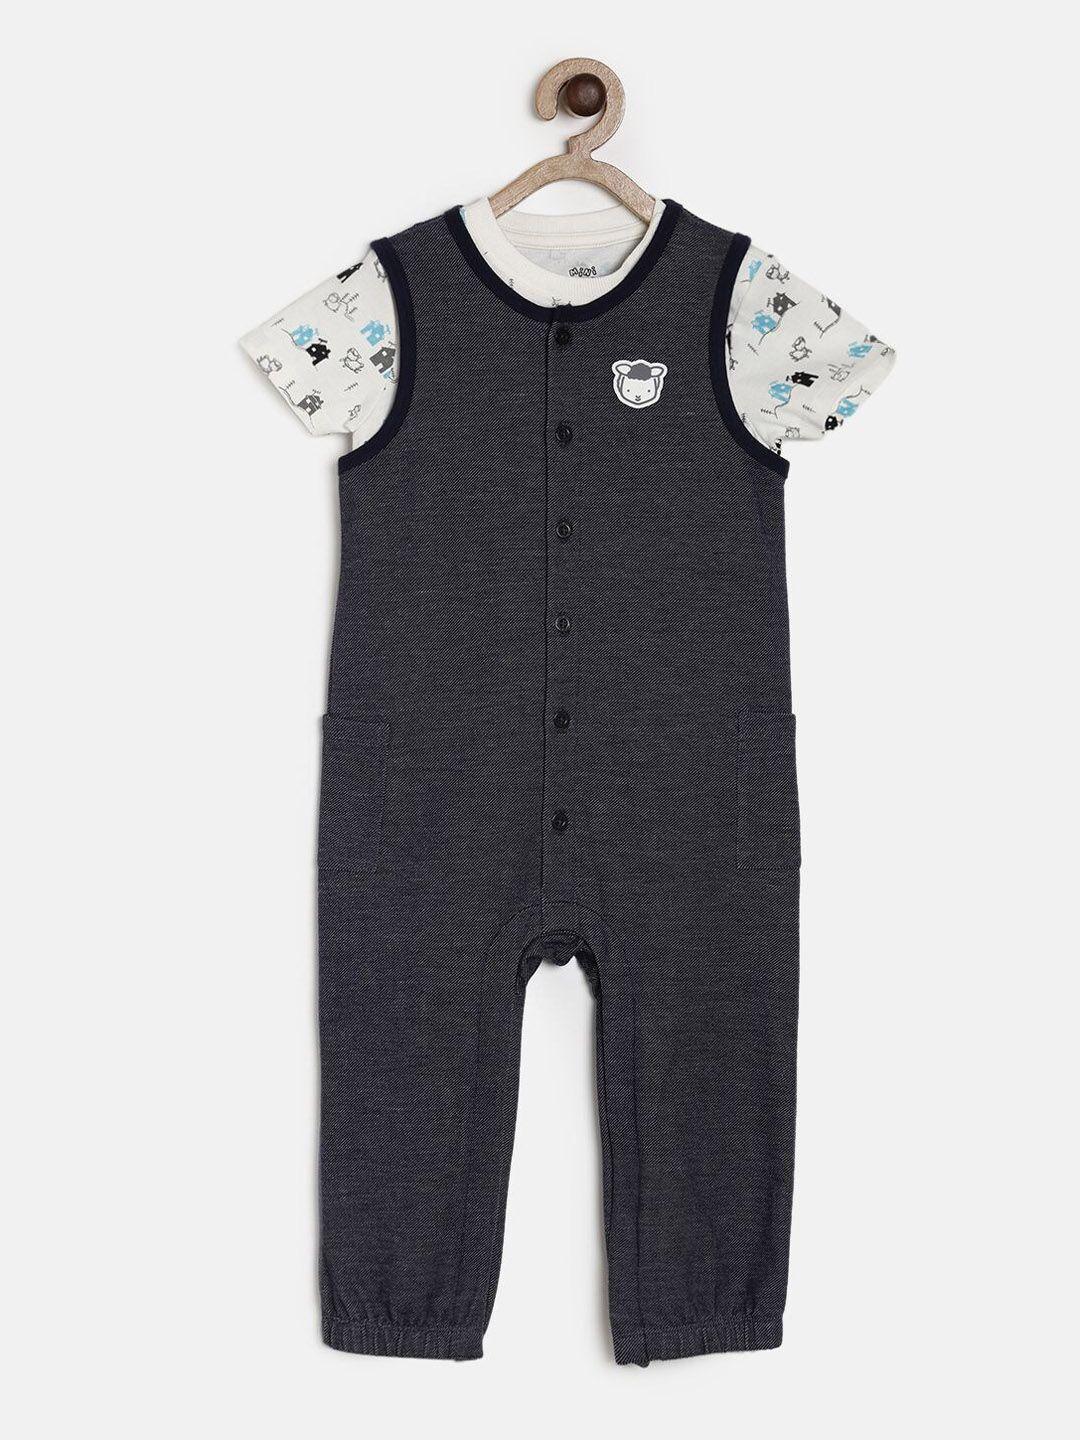 mini klub boys charcoal grey & white printed t-shirt with dungarees